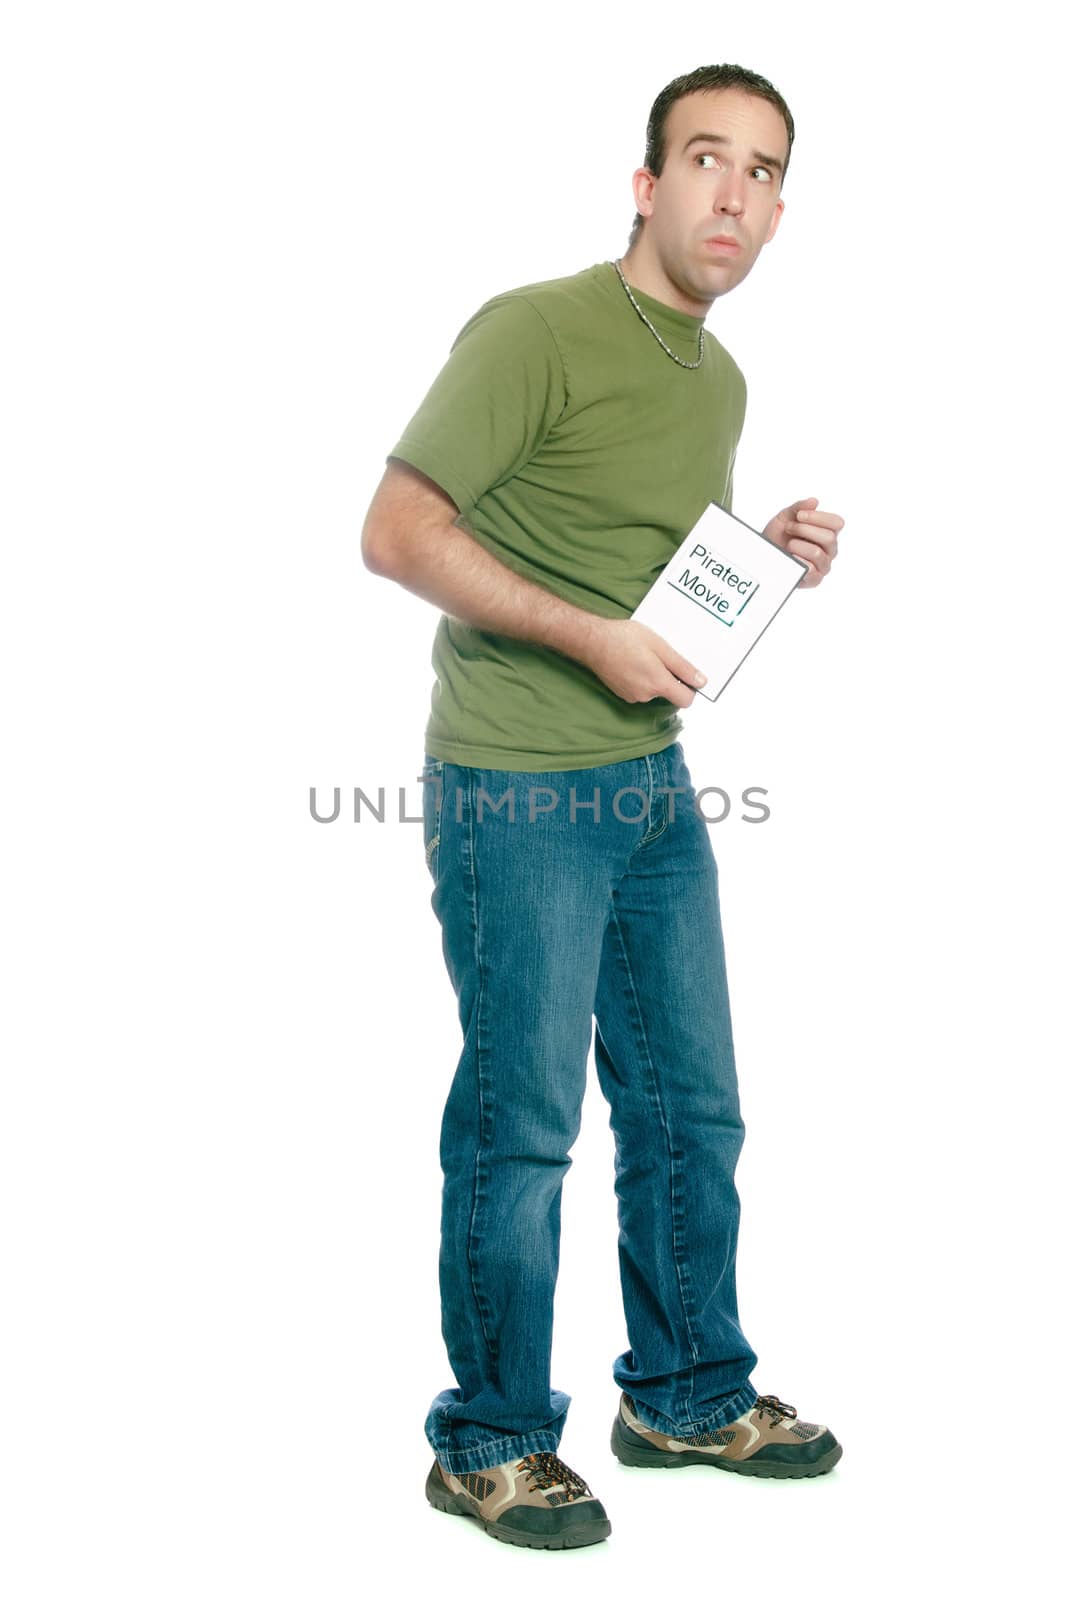 A young man sneaking away with an illegal movie download, isolated against a white background.